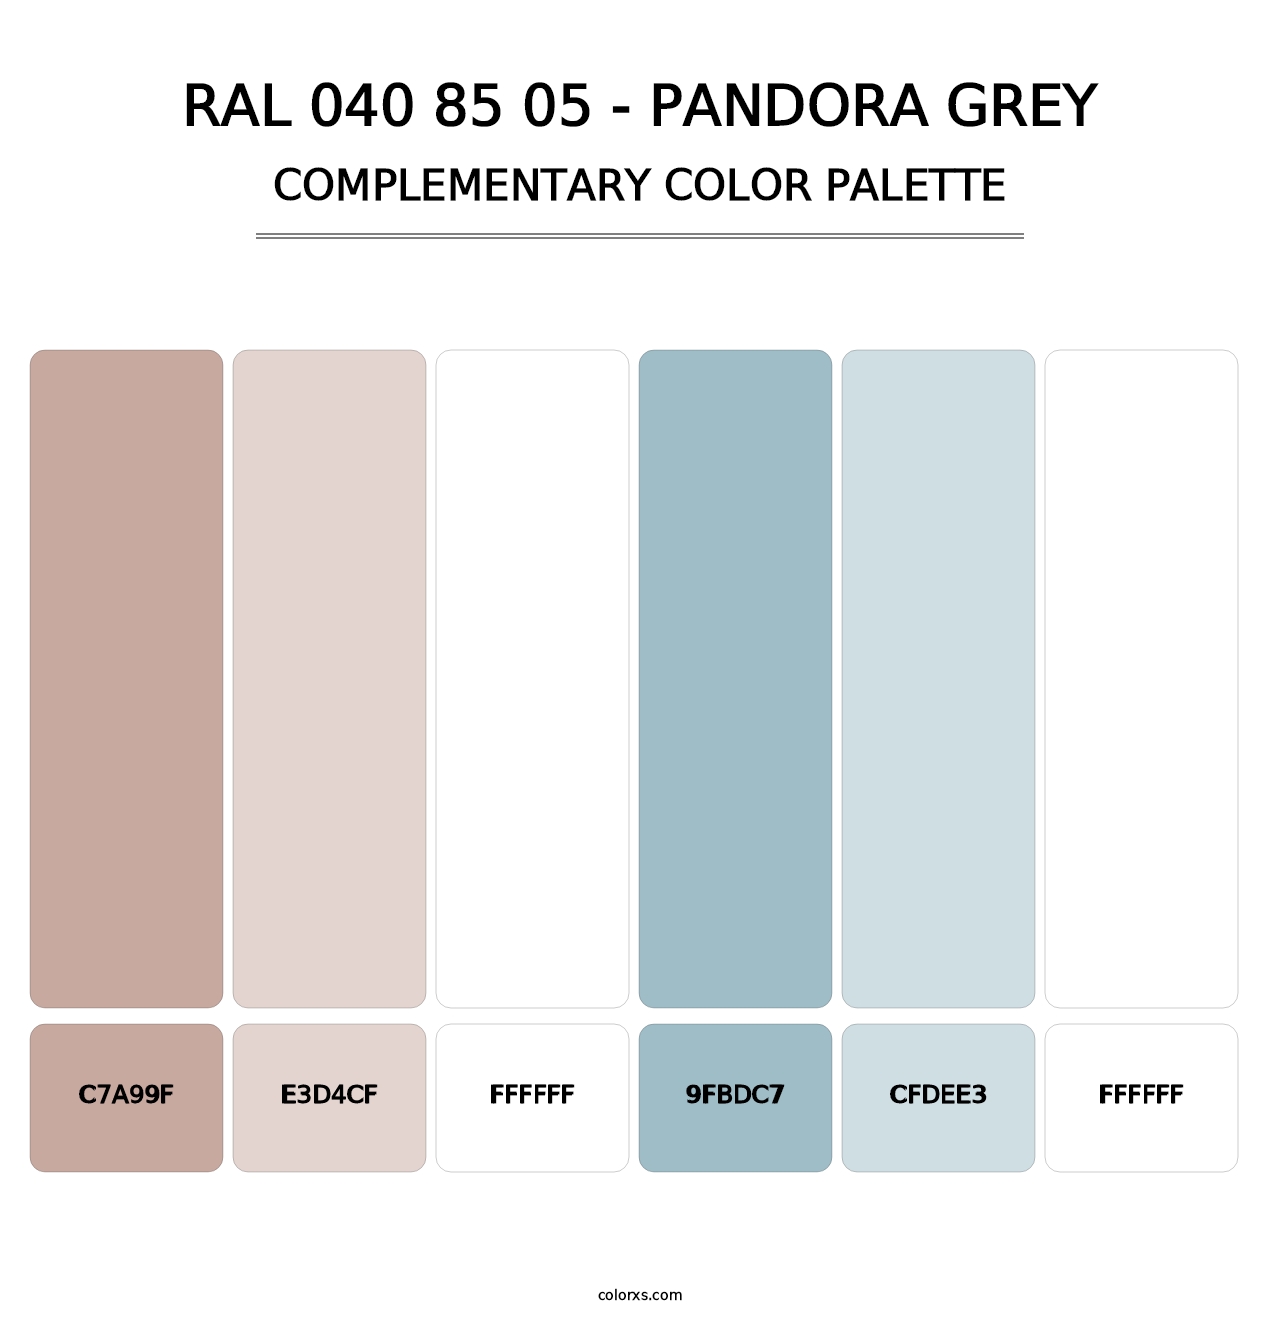 RAL 040 85 05 - Pandora Grey - Complementary Color Palette